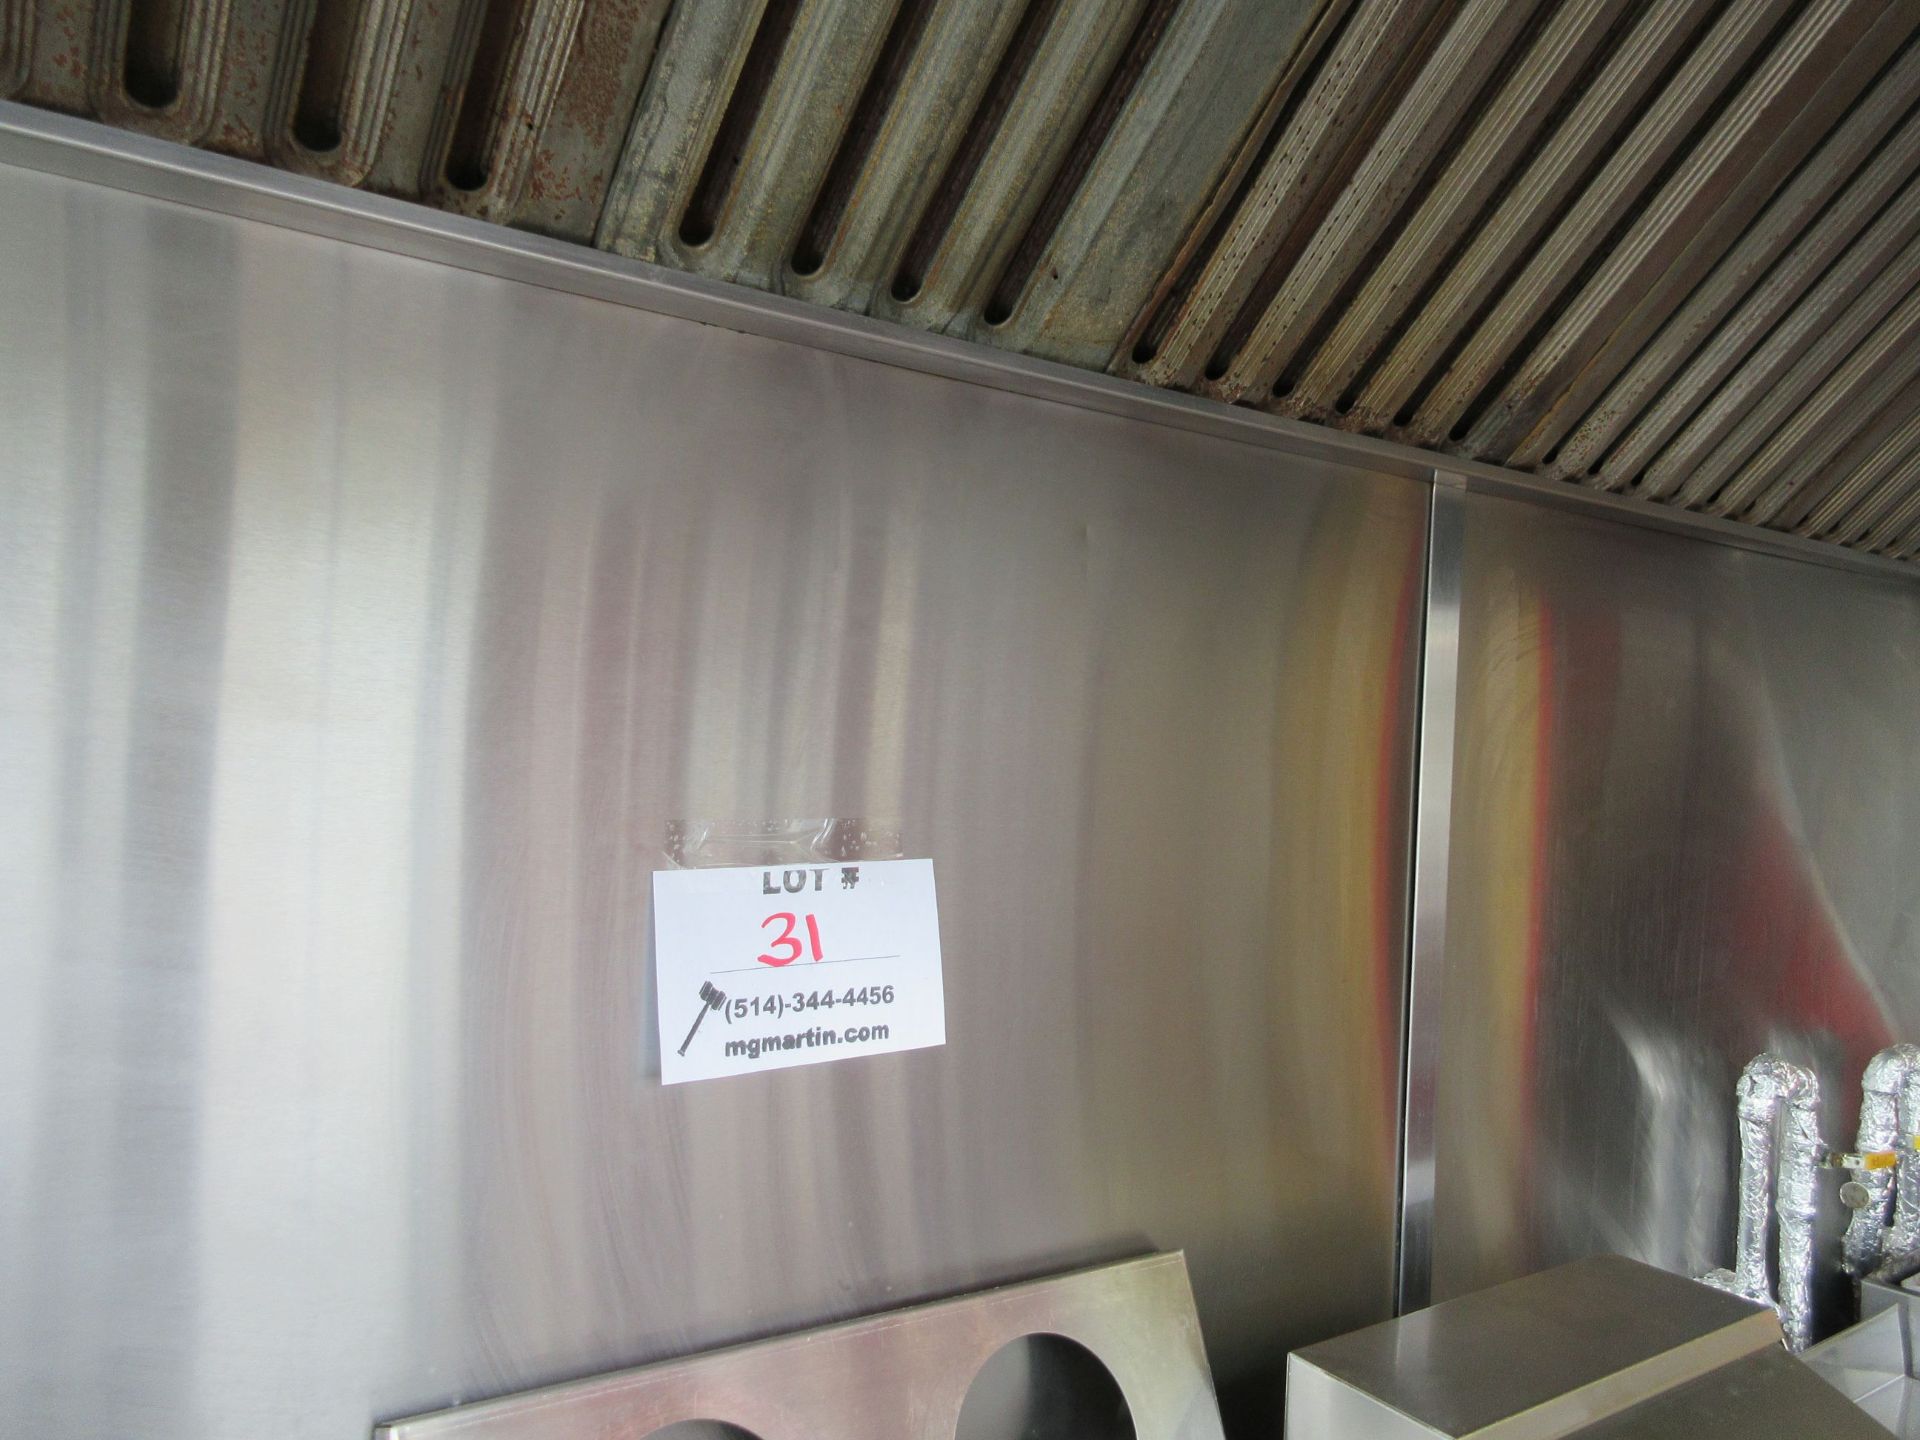 HCE ventilation hood c/w CO2 system (120"w x 42"d x 22"h) - Image 6 of 6